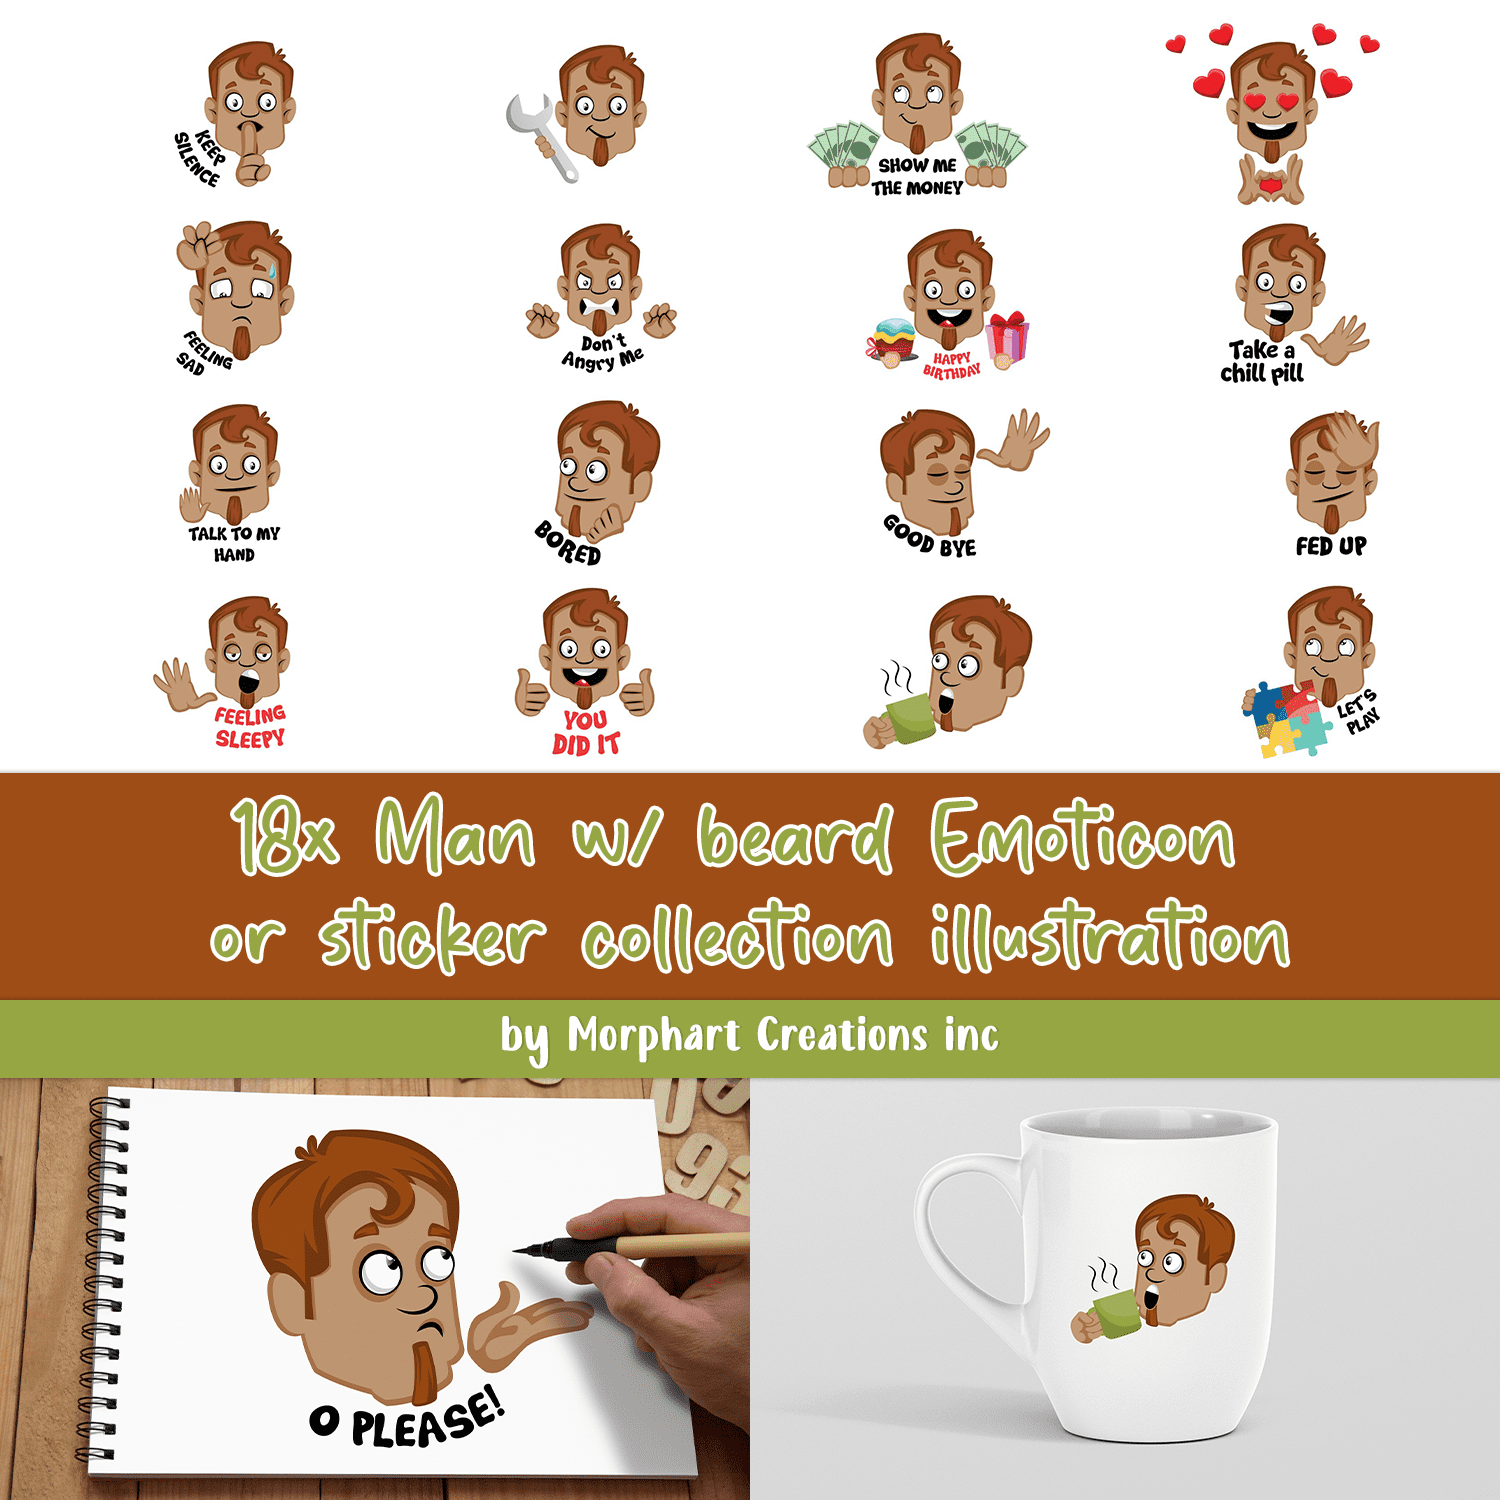 Cover of adorable images of man with beard emoticon.